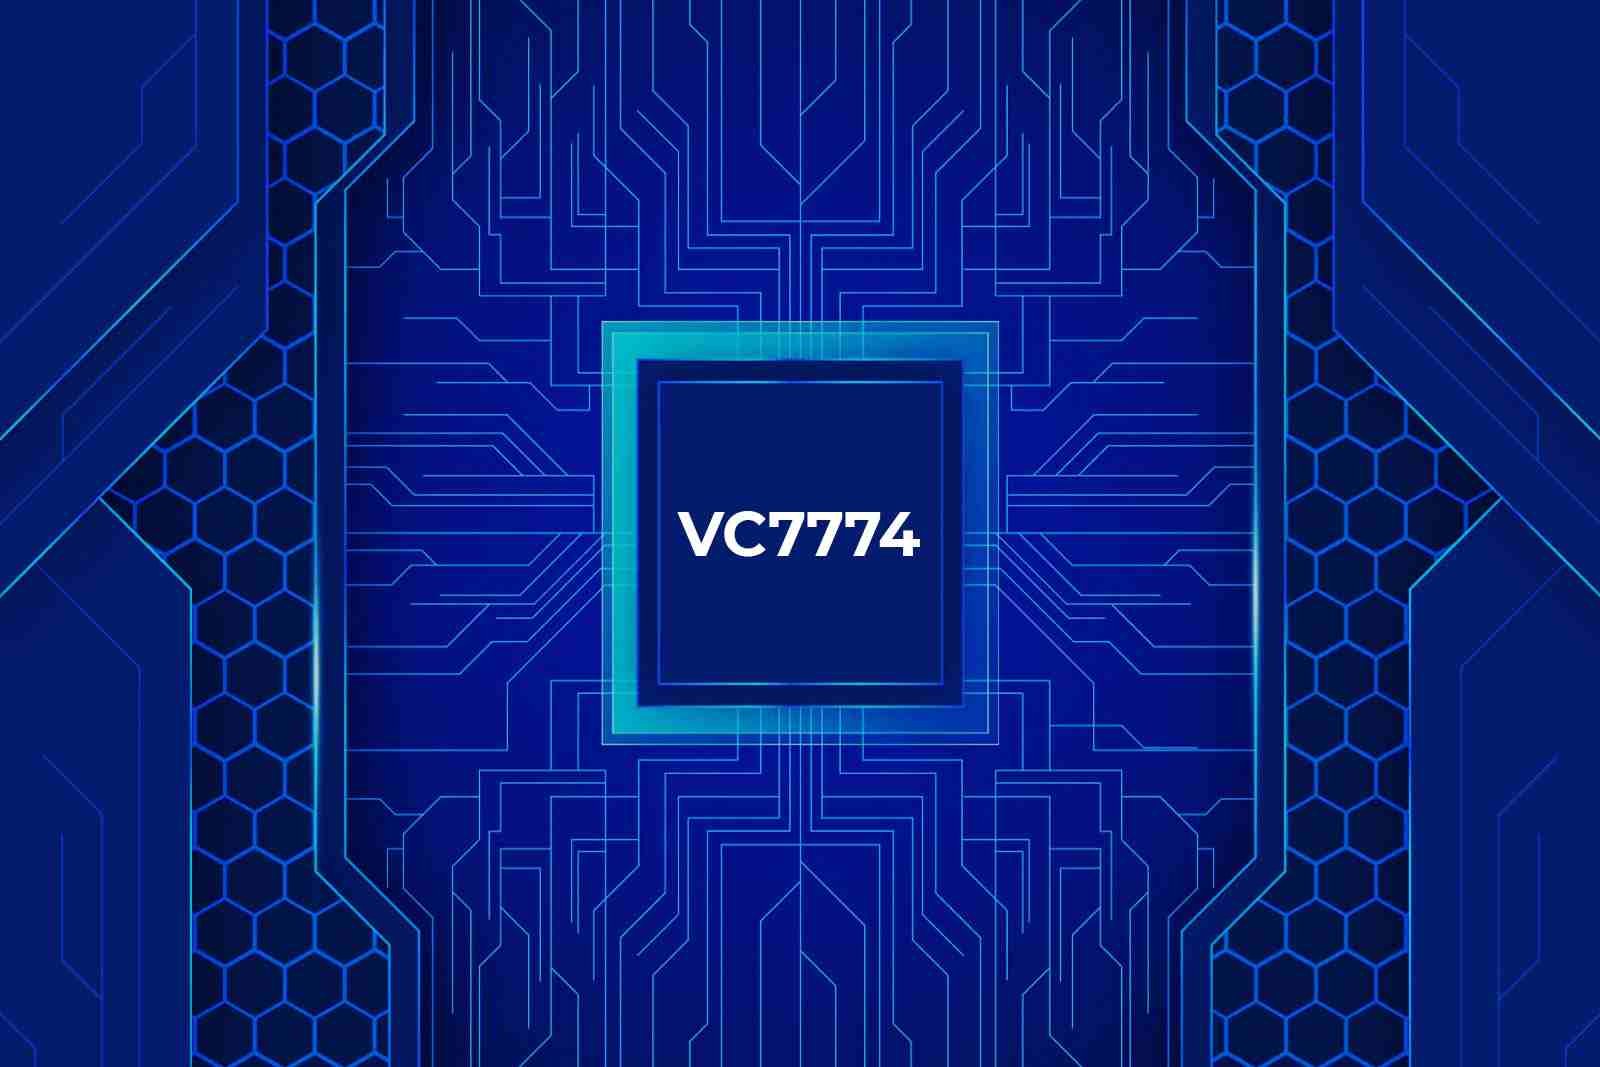 VC7774 Trends to Watch Out for in 2024